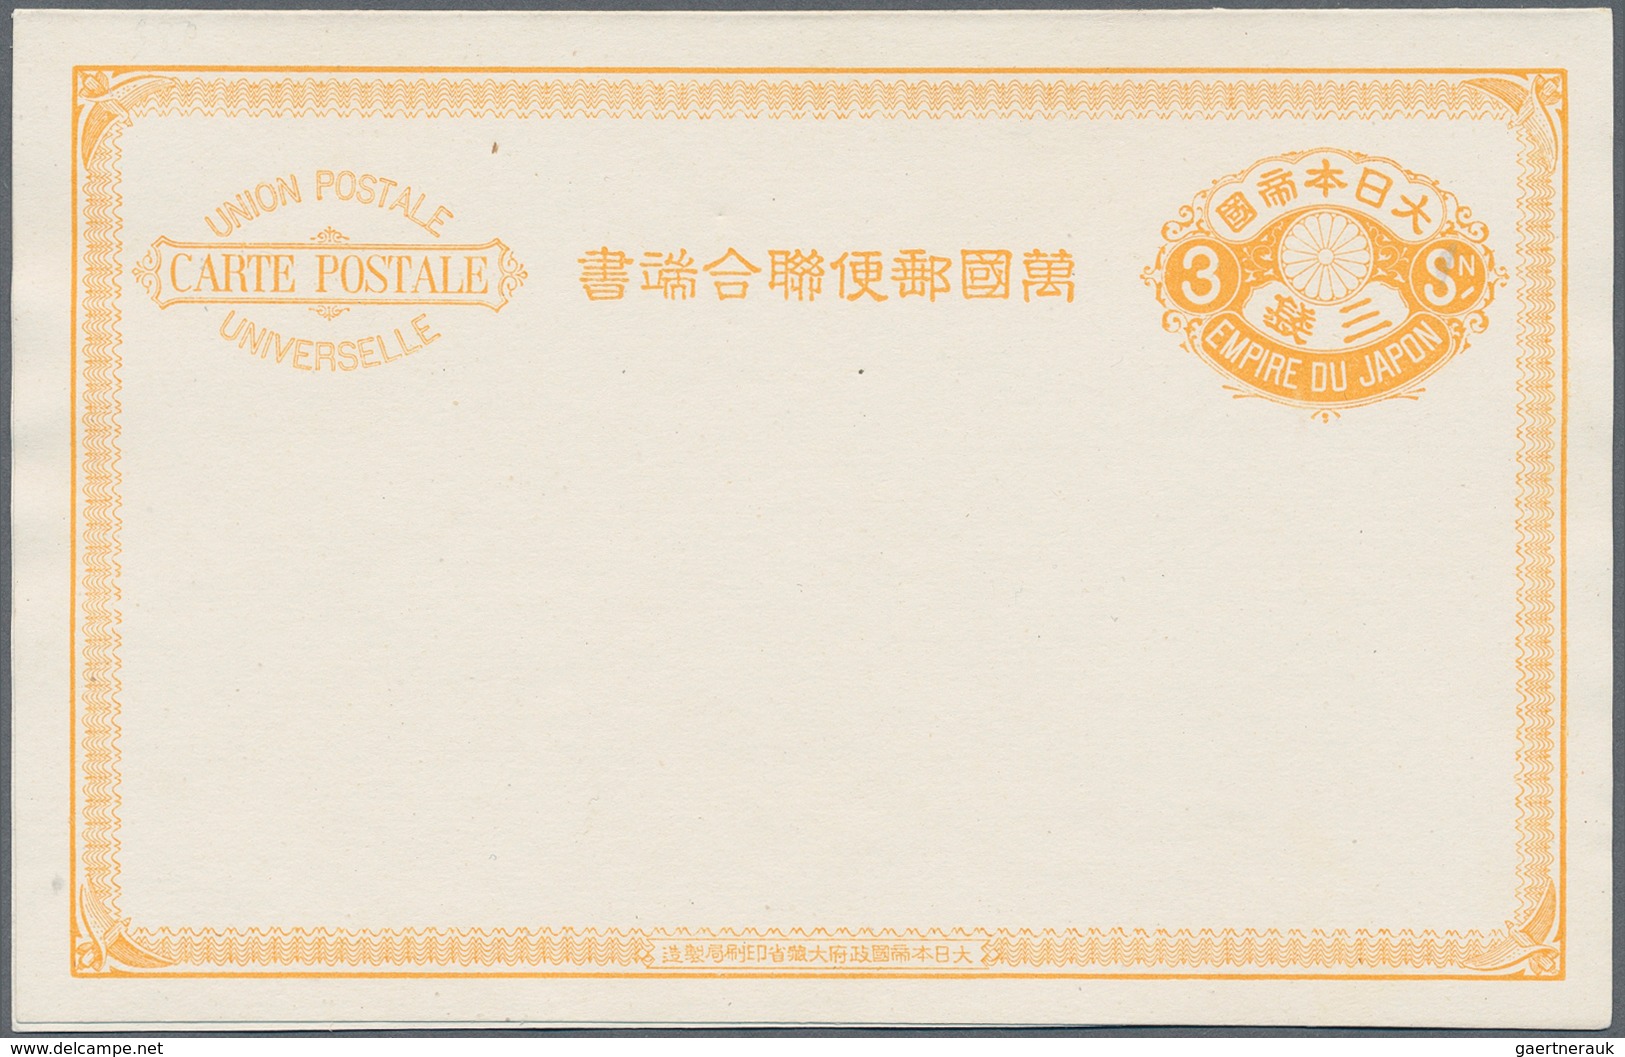 Japan - Ganzsachen: 1873/1960, mint only collection of 94 almost all different cards/UPU-cards/wrapp